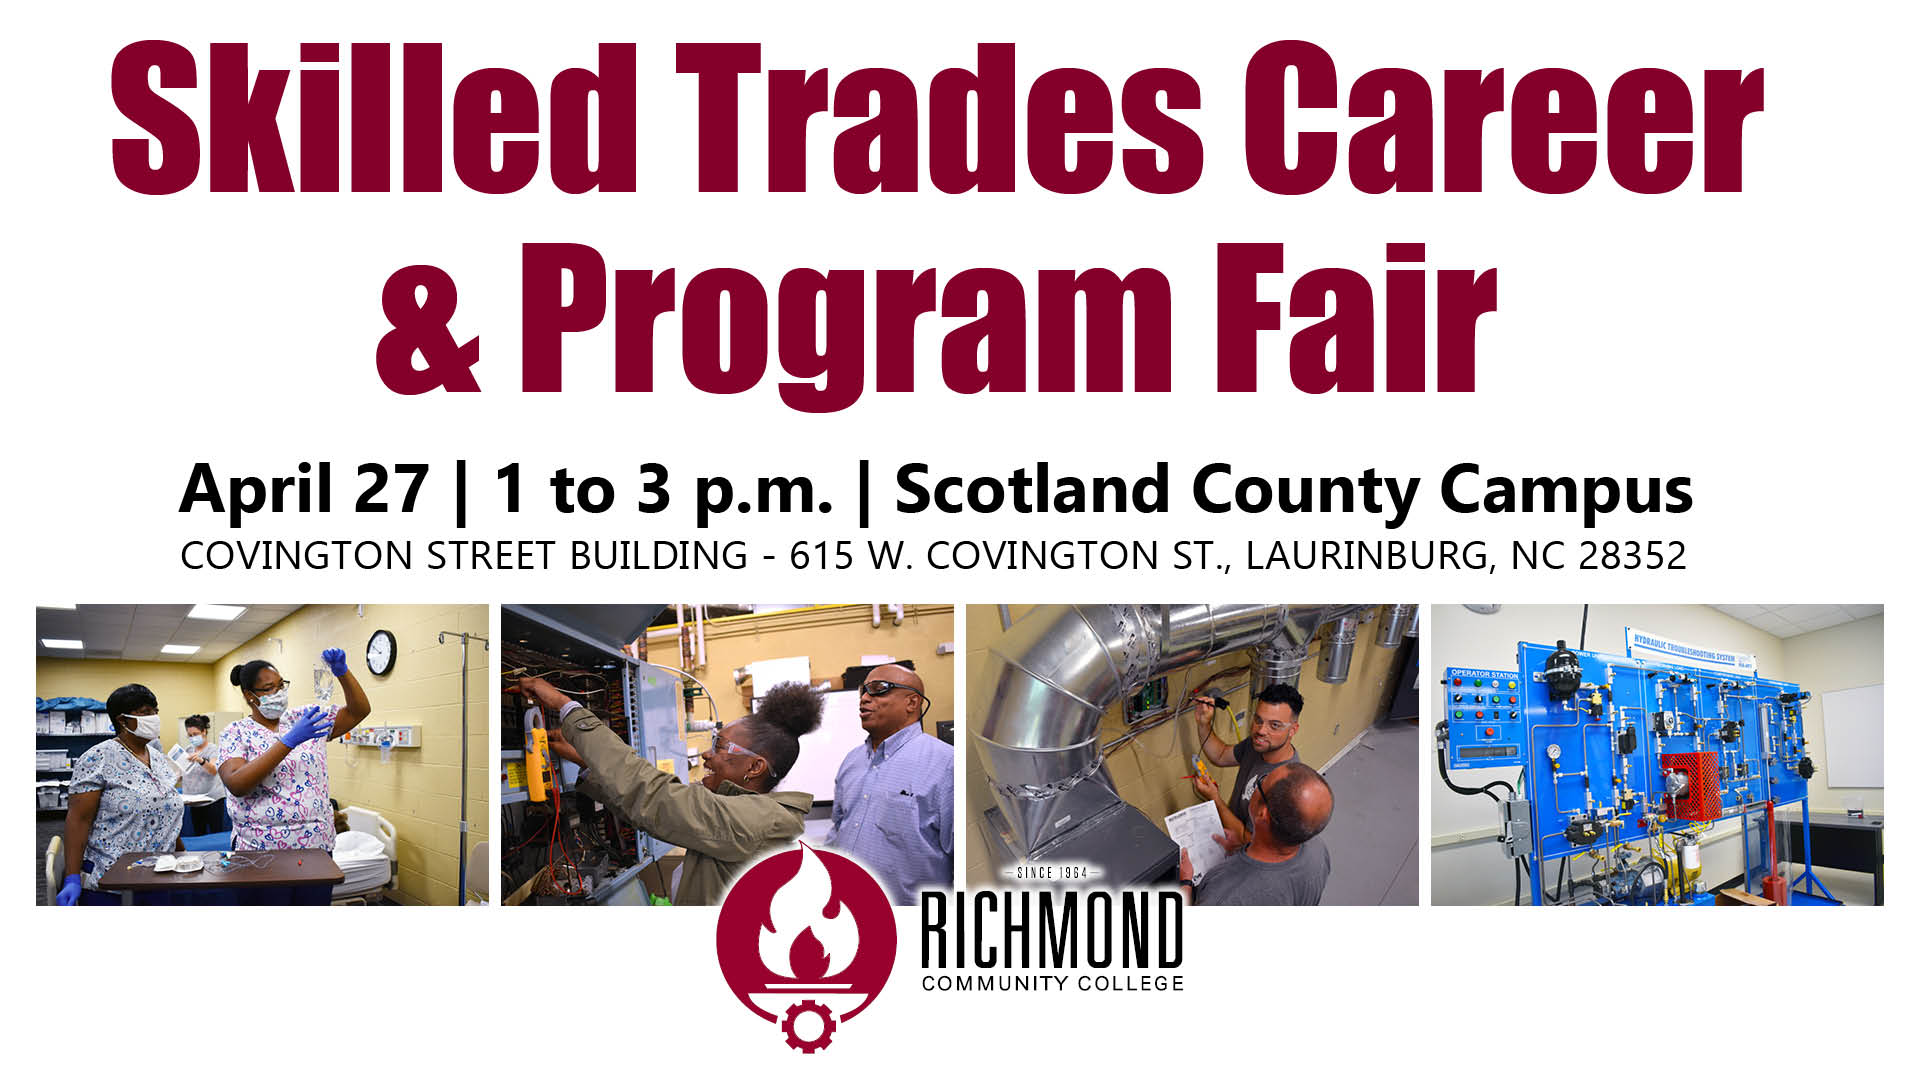 Skilled Trades Career & Program Fair on April 27 at the Scotland County Campus. From 1 to 3 p.m. at the Covington Street Building in Laurinburg.